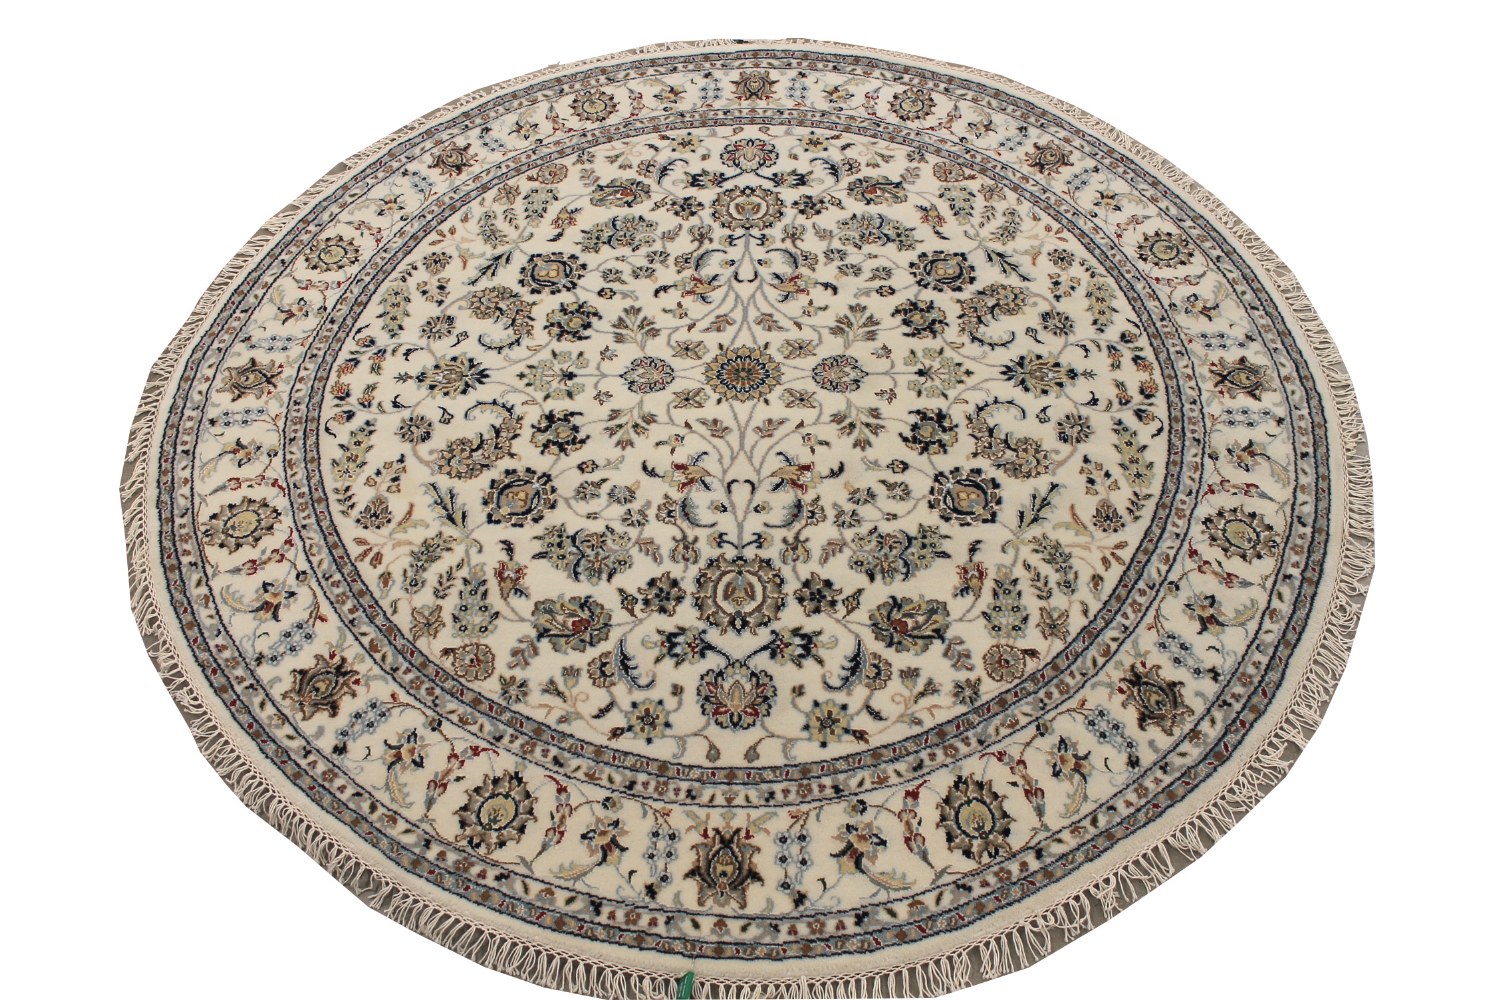 6 ft. - 7 ft. Round & Square Traditional Hand Knotted Wool Area Rug - MR028294